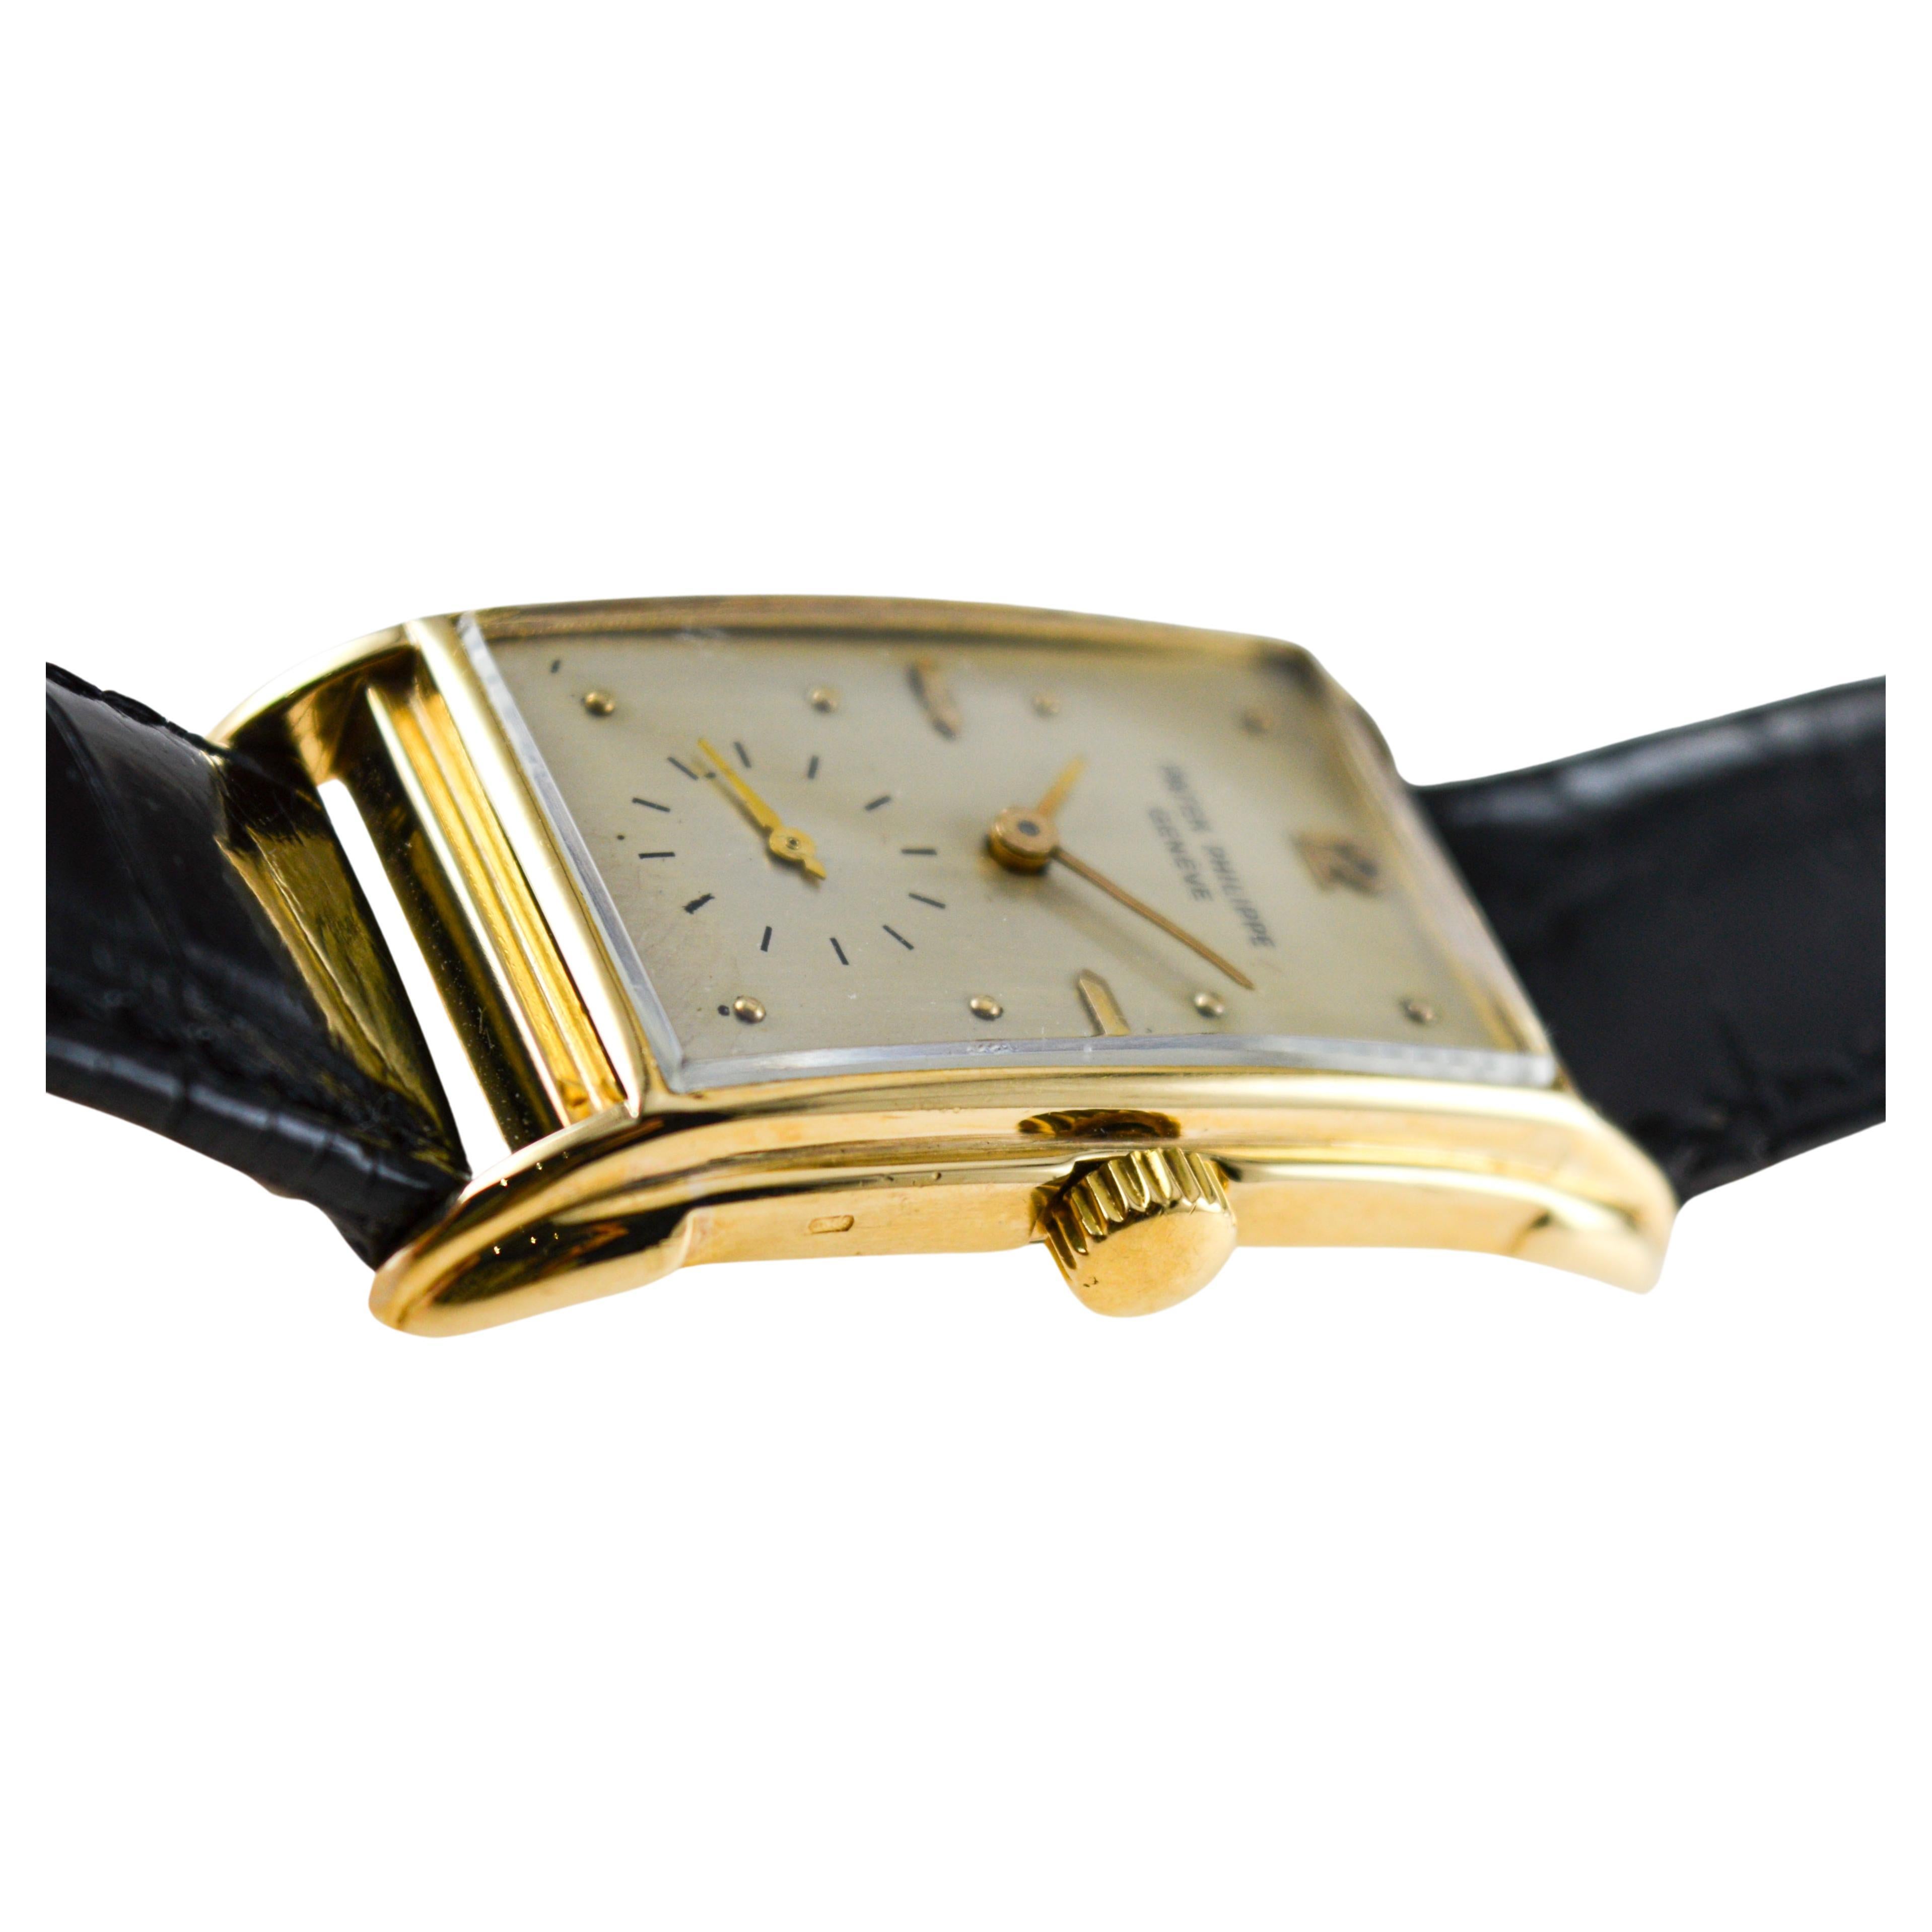 Patek Philippe Yellow Gold Art Deco Style Manual Watch, circa 1948 with Archival For Sale 6